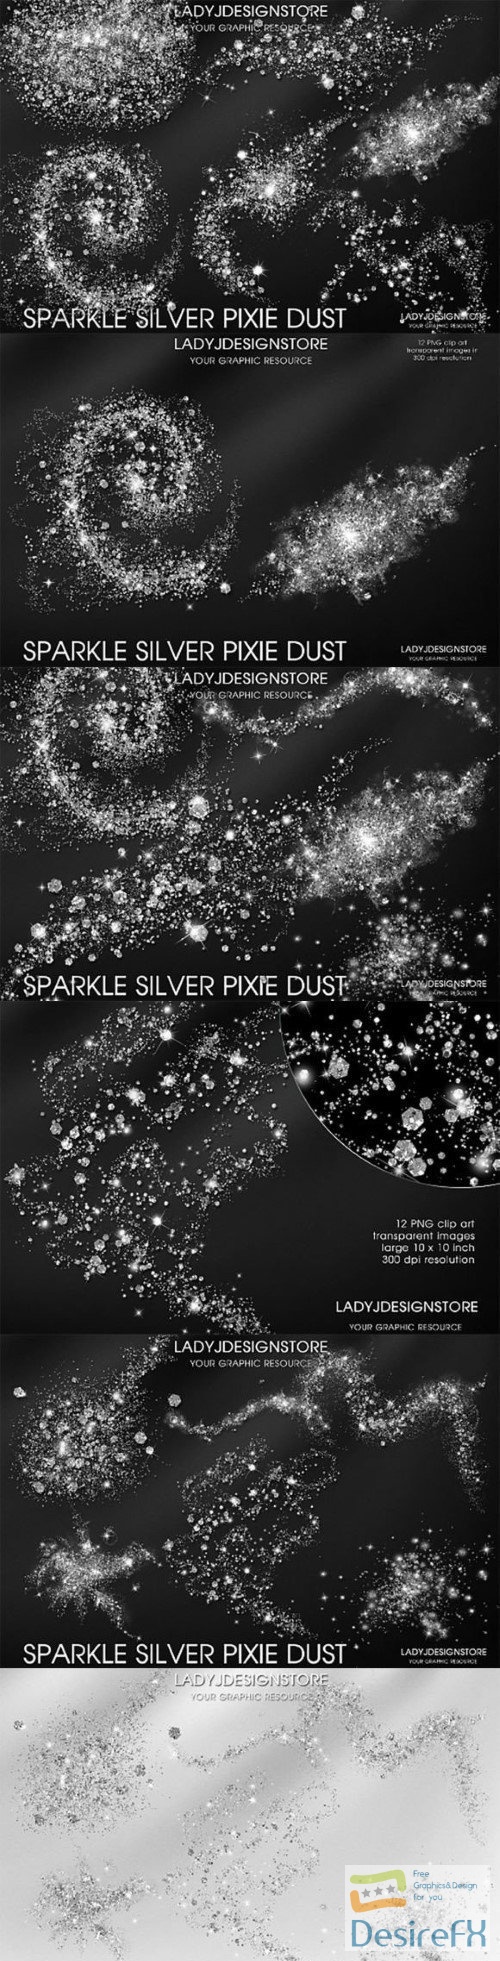 Silver Pixie Dust Overlays Clipart